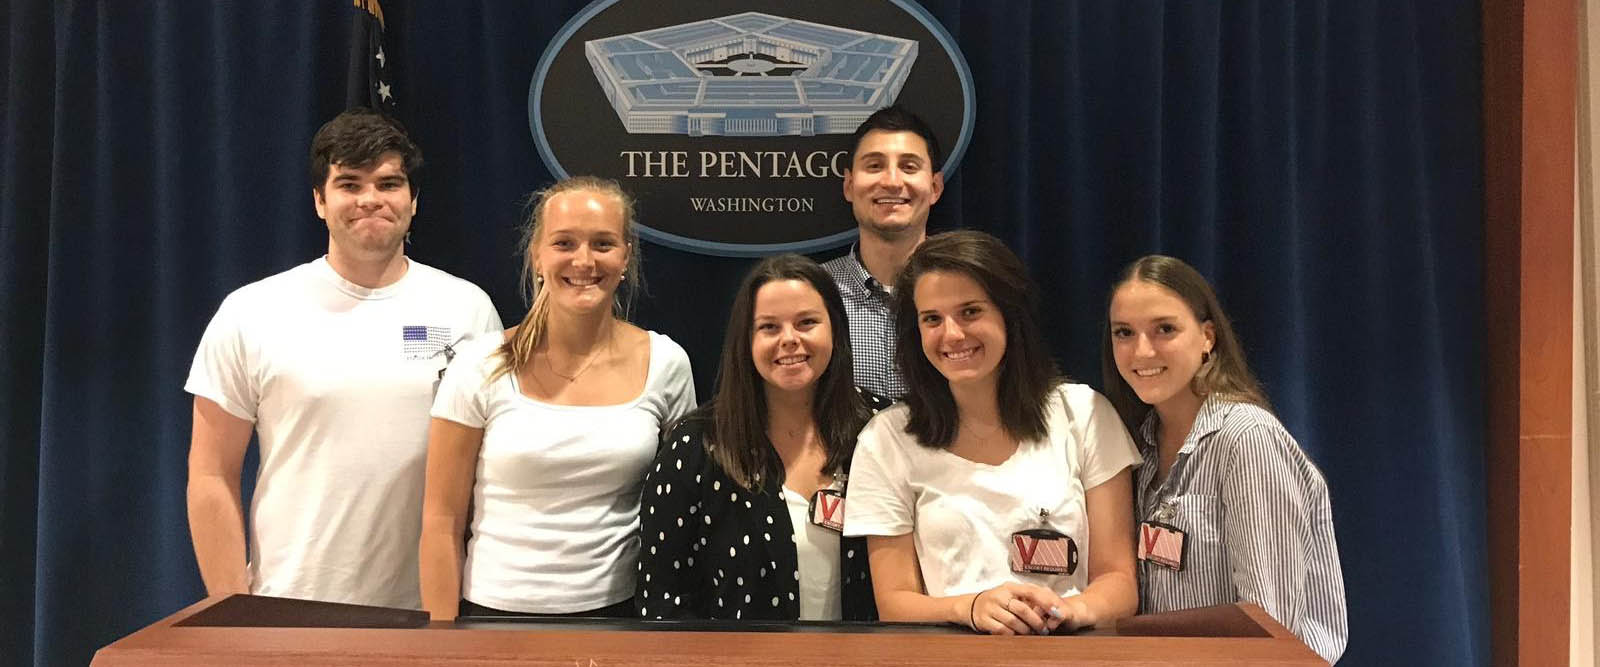 Belmont USA students pose in front of the podium at the Pentagon in Washington